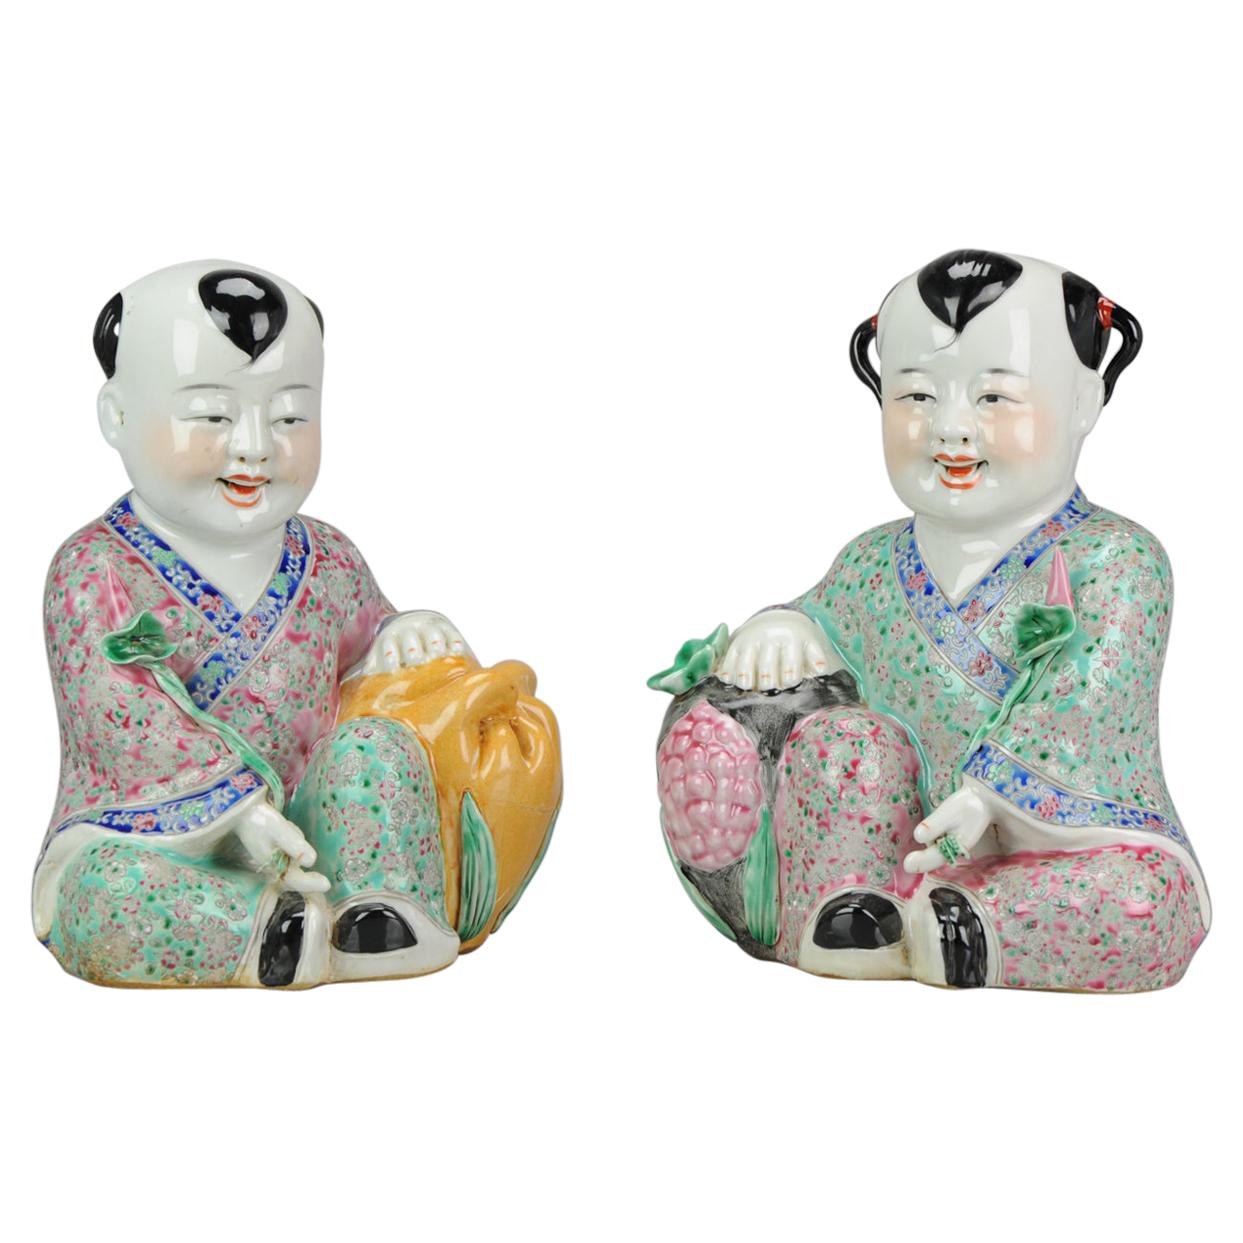 Statues China 1940/50 He-He Twins Marked on Base Chinese Porcelain Proc/Minguo For Sale